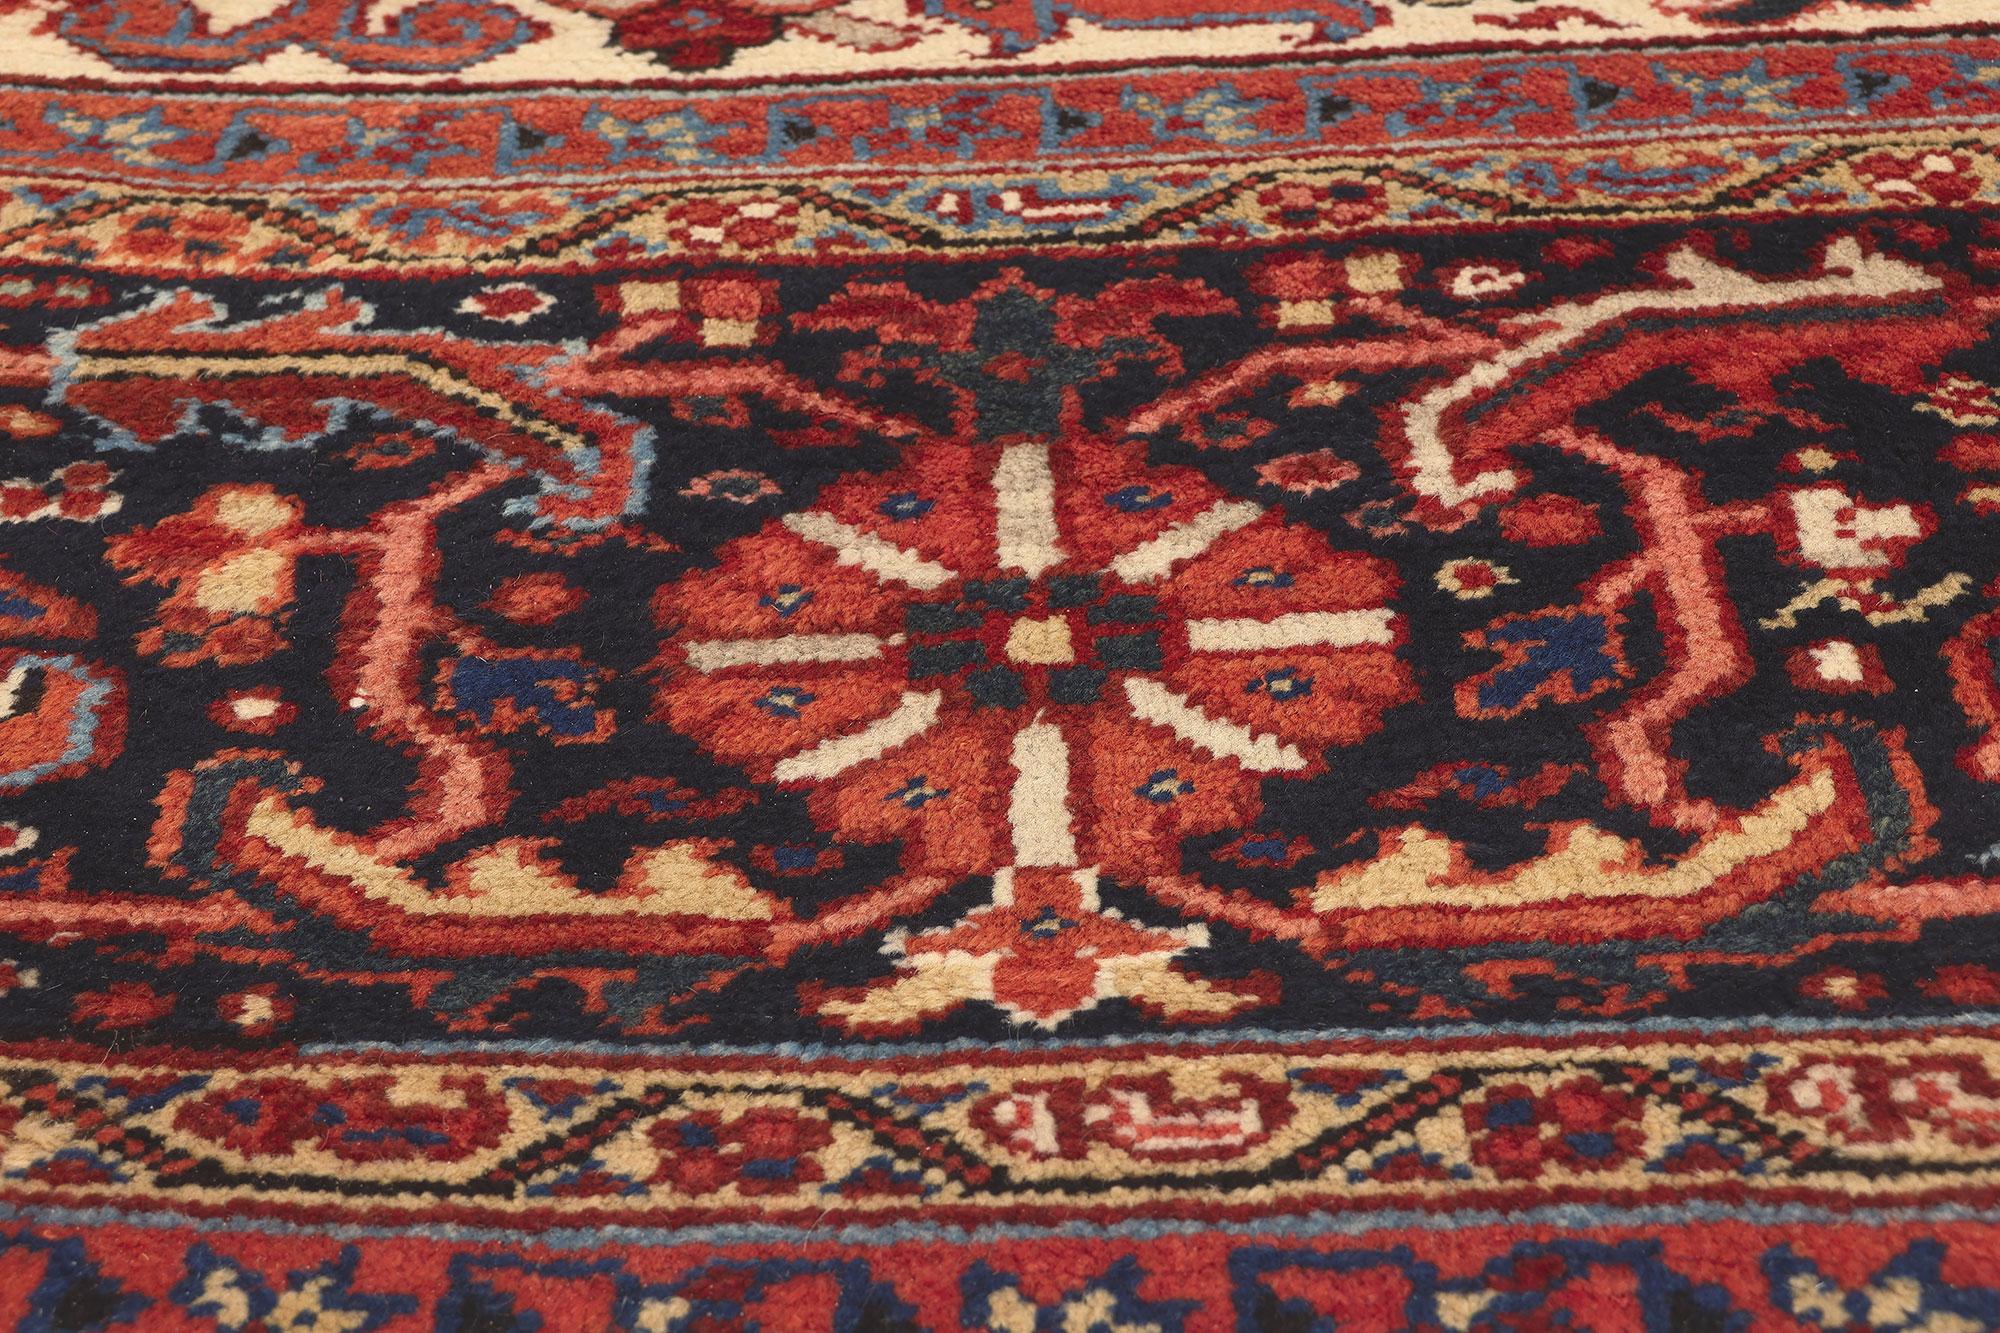 1920s Extra-Large Antique Red Persian Rug Heriz Carpet  In Good Condition For Sale In Dallas, TX